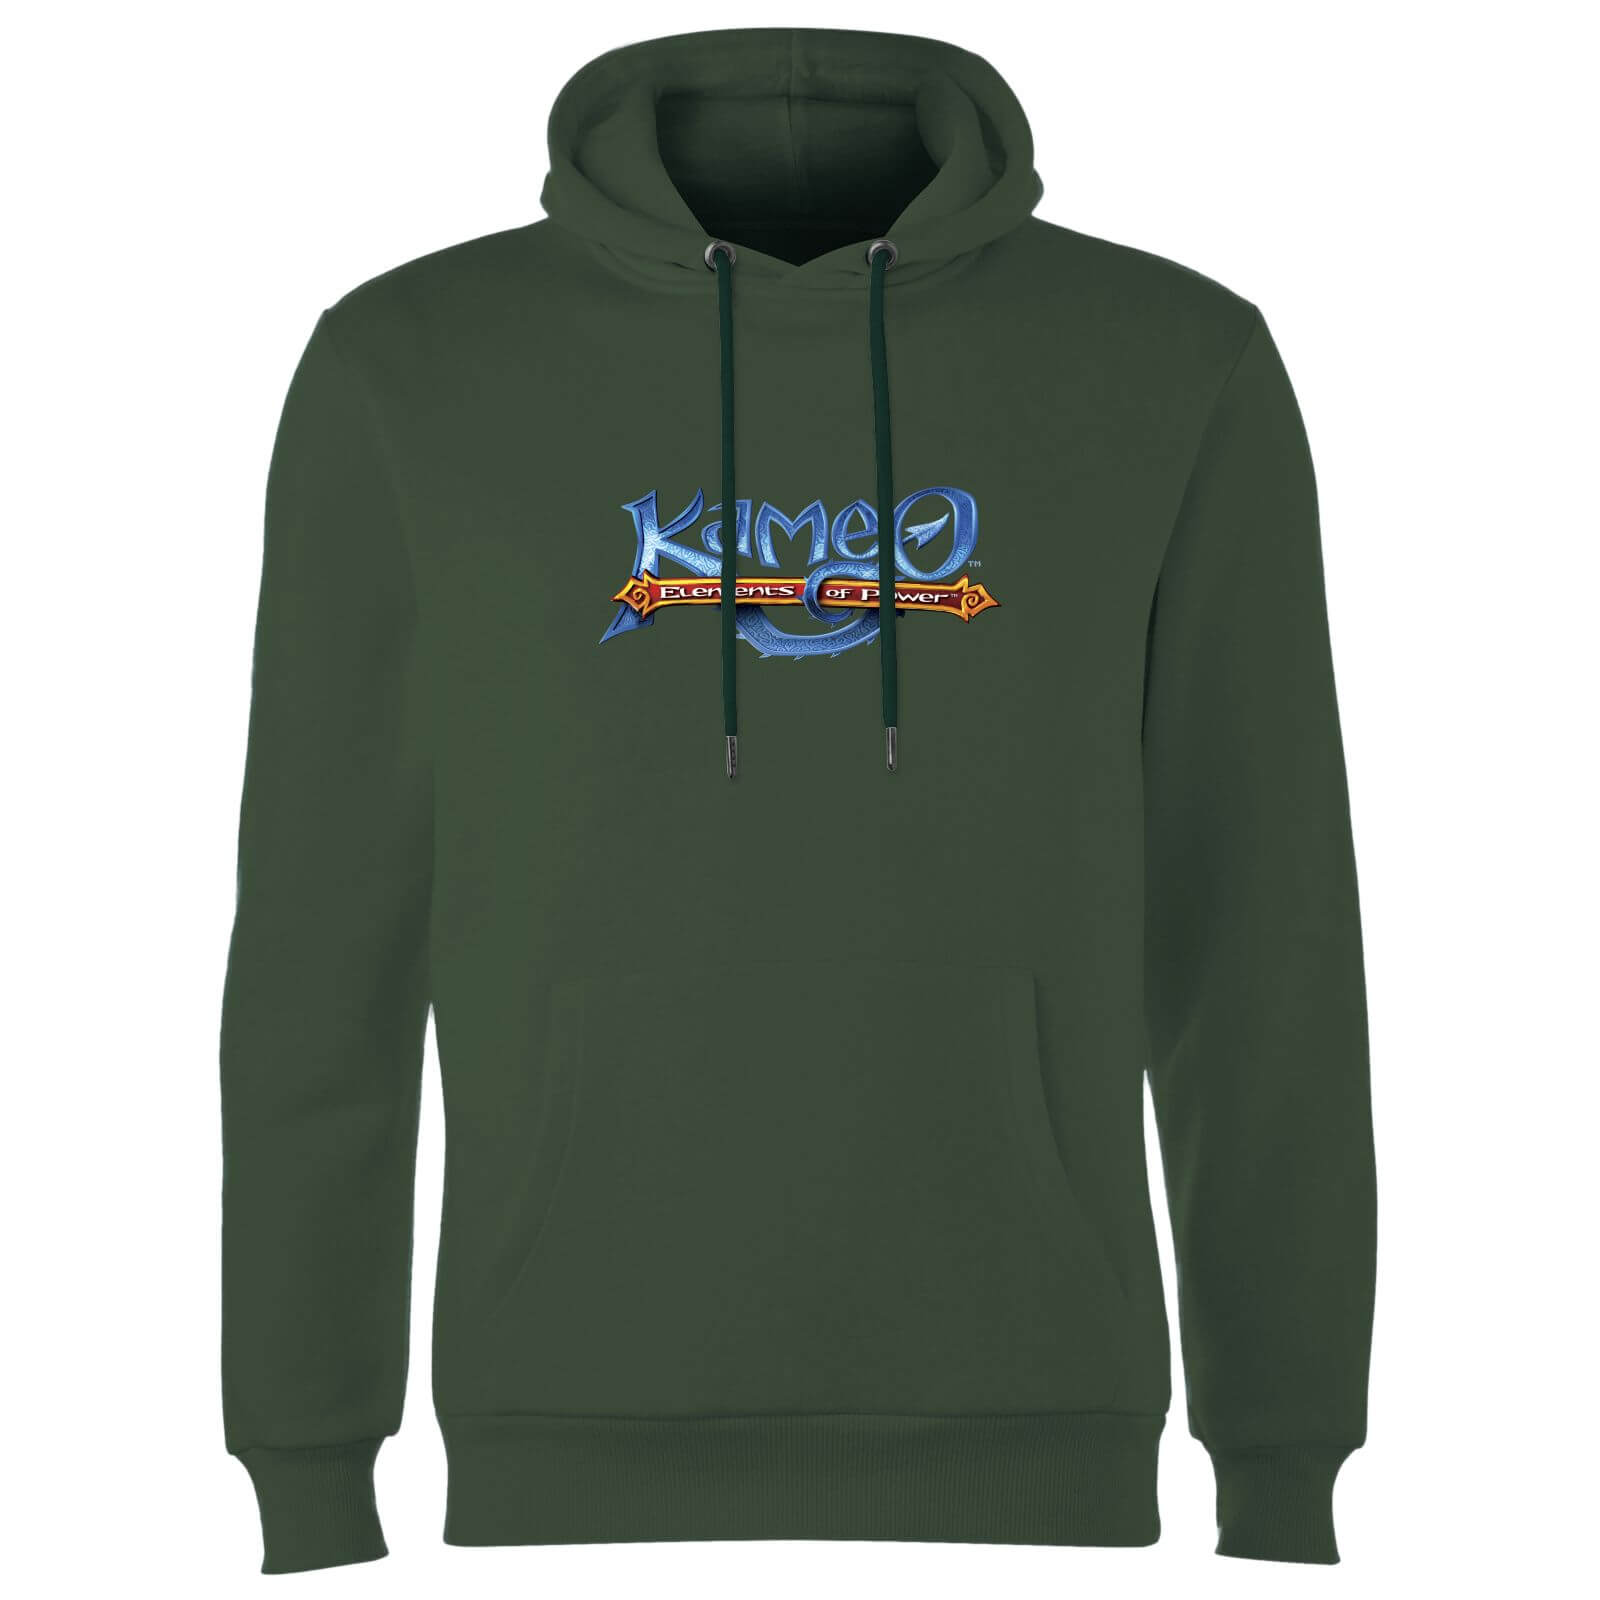 Kameo Logo Hoodie - Forest Green - L - Forest Green